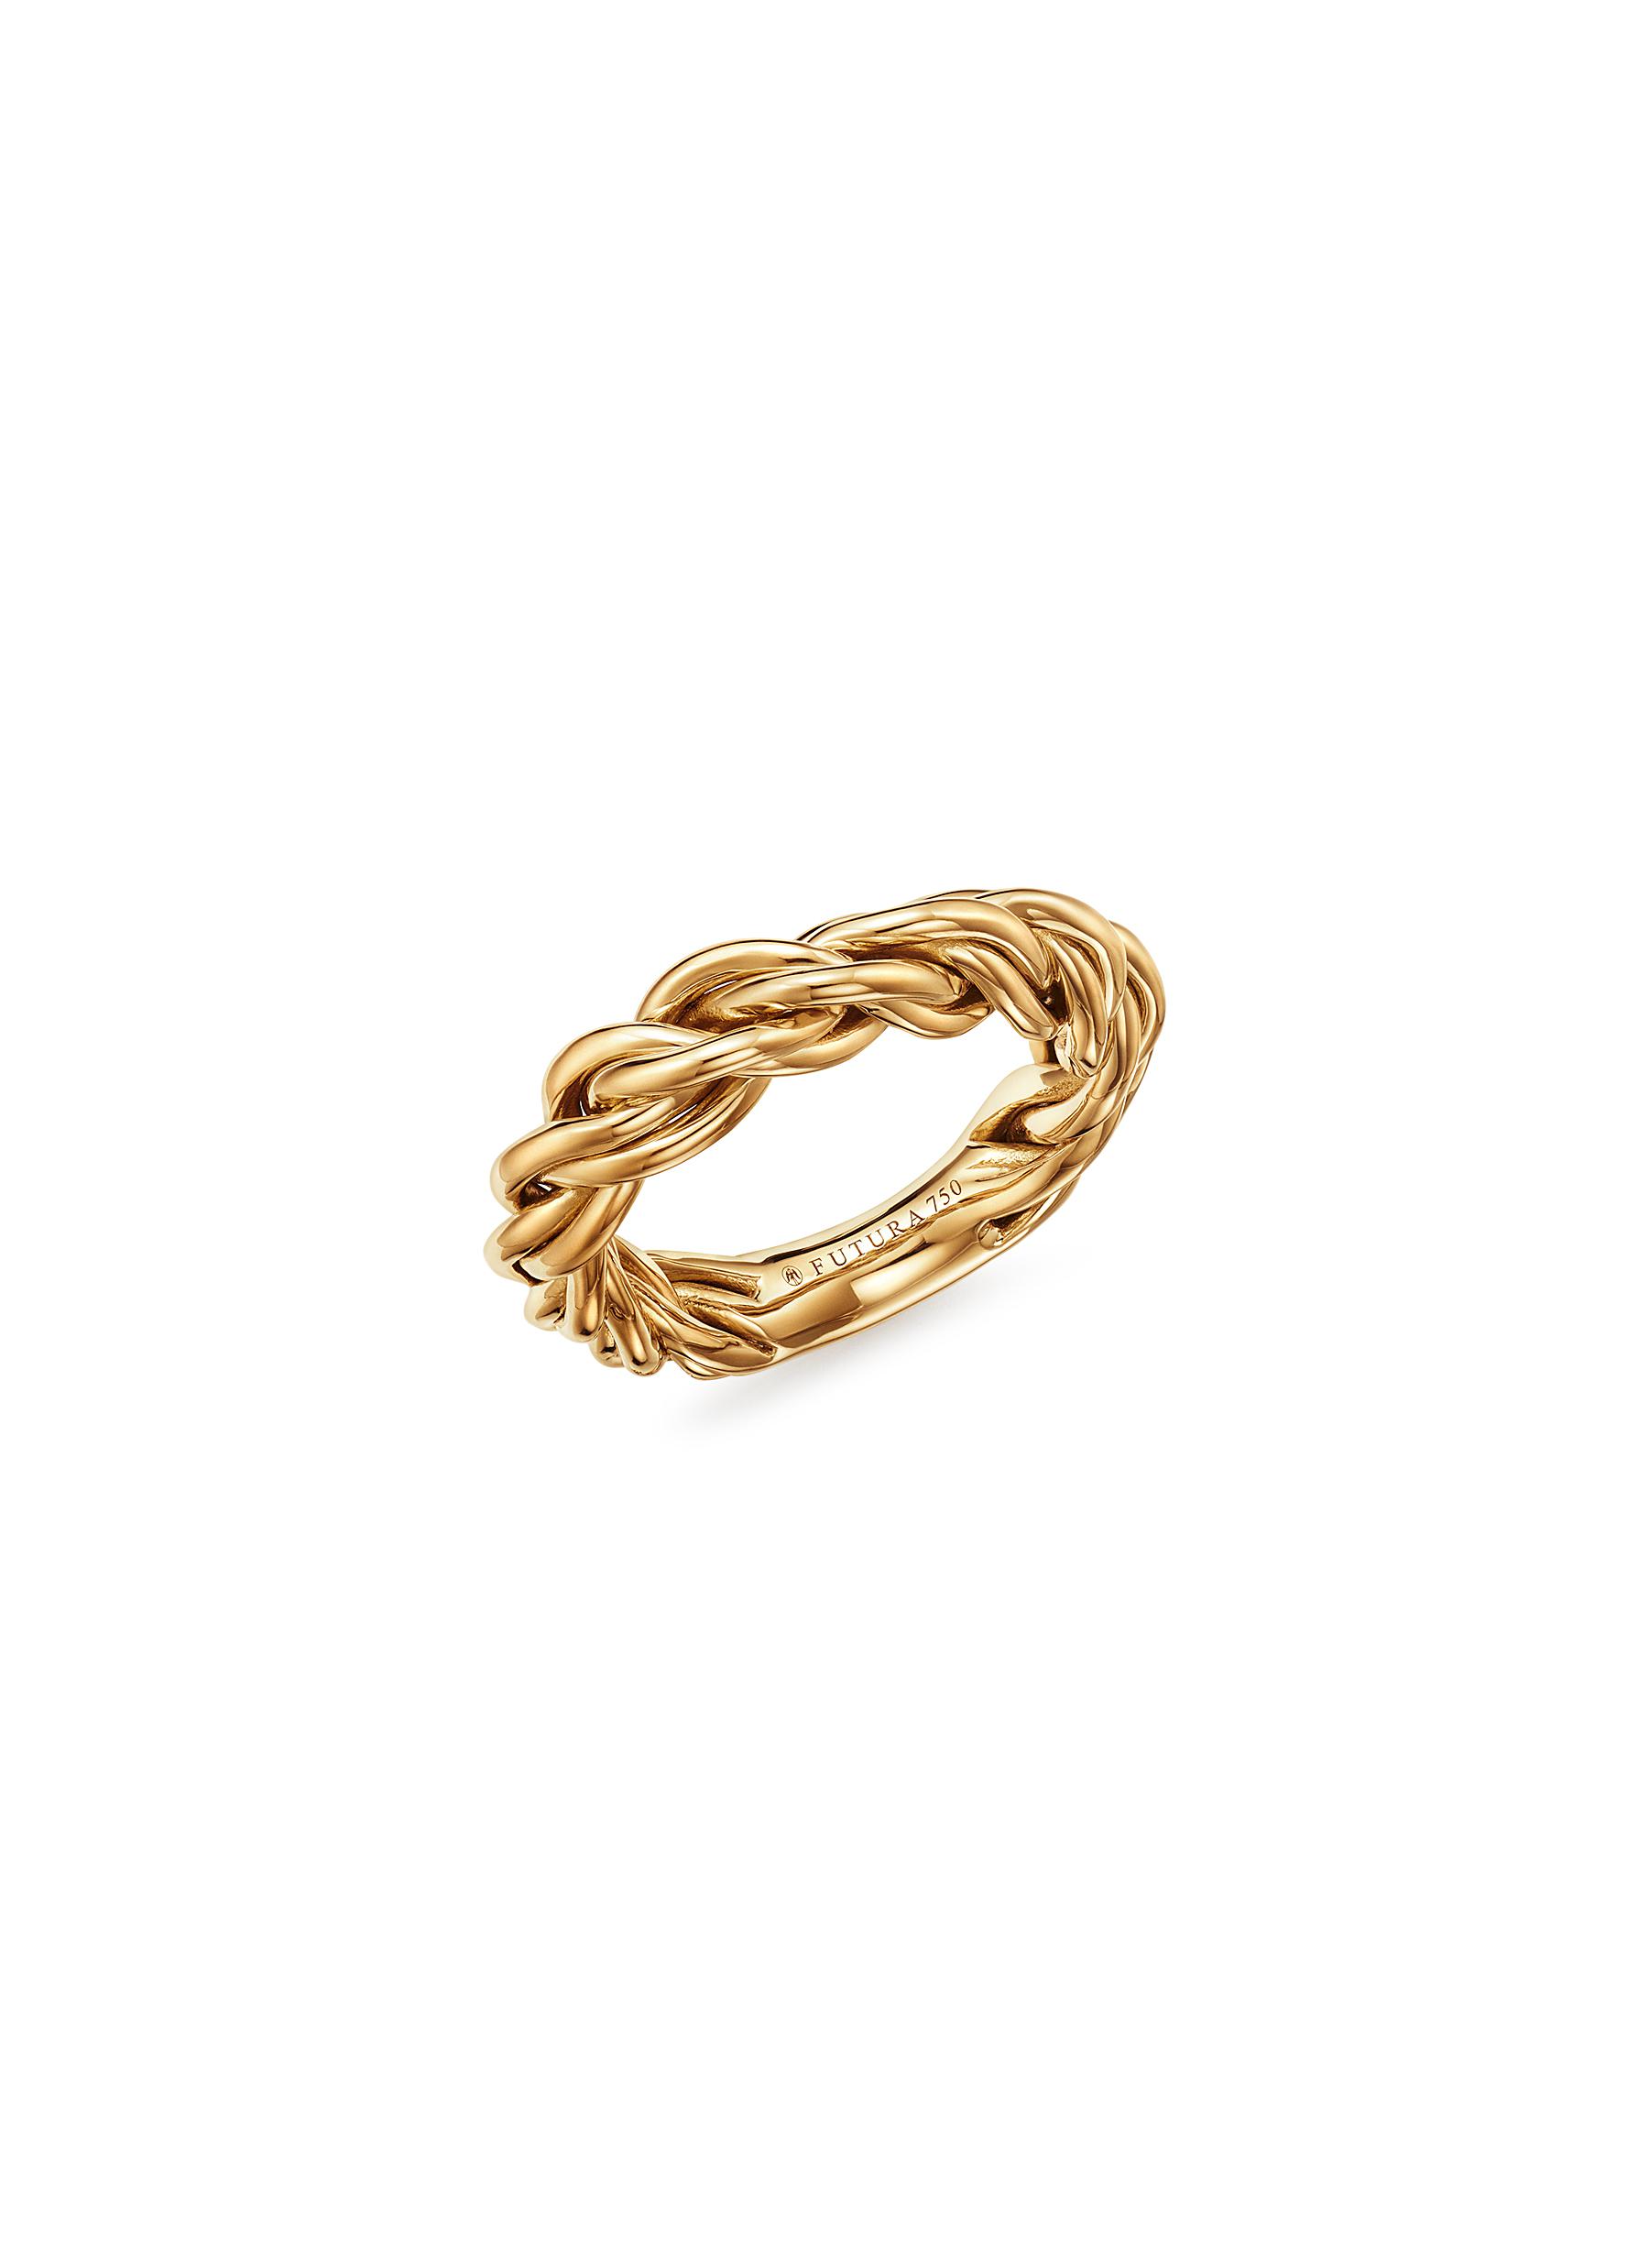 FUTURA ‘Astrid' 18k fairmined ecological gold ring